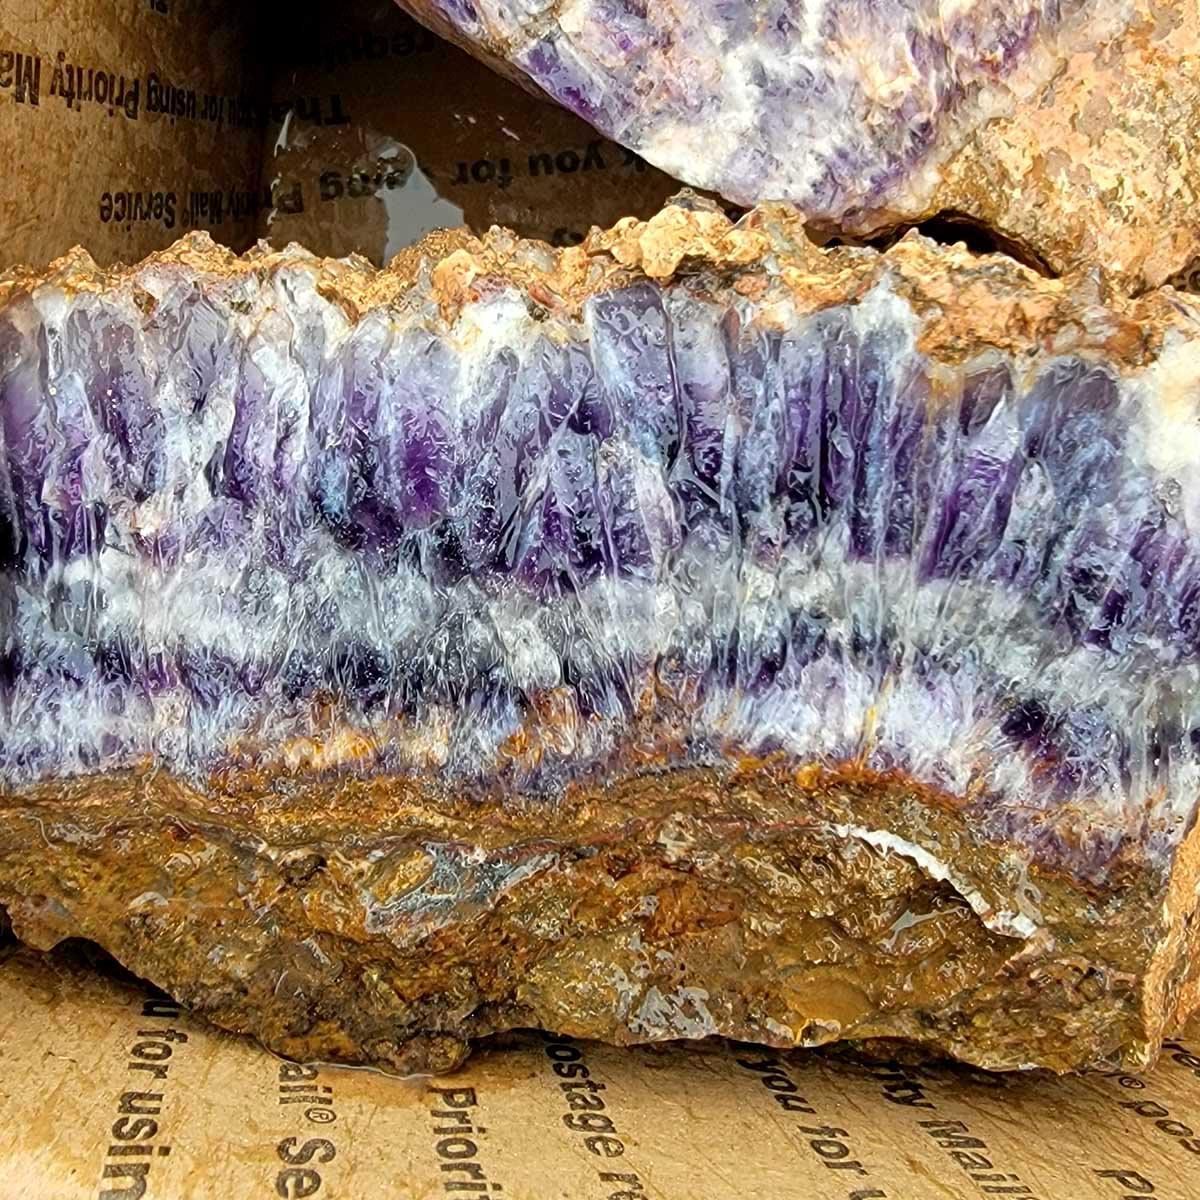 Moroccan Amethyst Lace Cutting Rough Flatrate! - LapidaryCentral